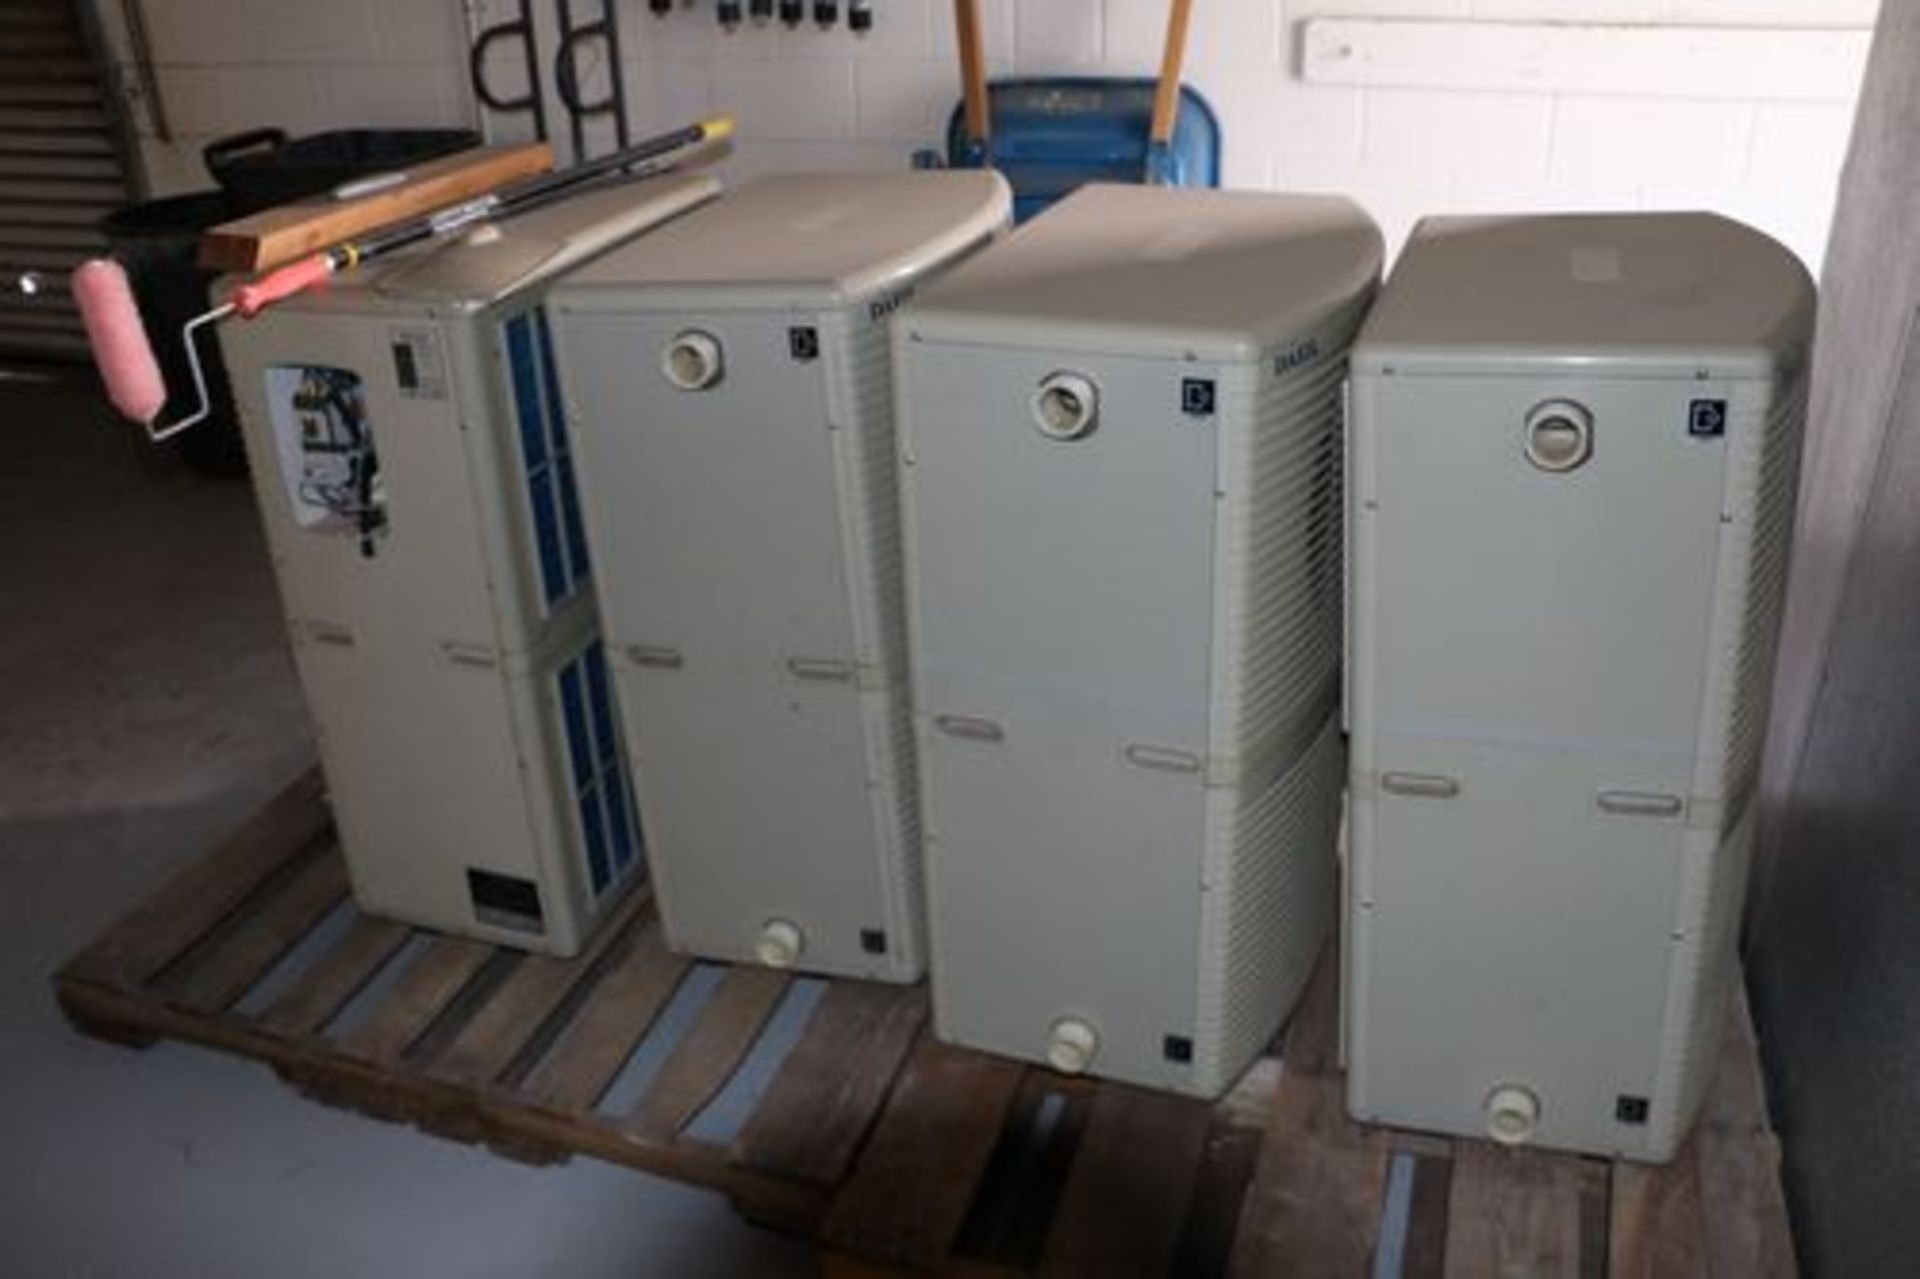 Seven Daeil Sun Cool Water Chillers, 4,800-7,200 KCal/Hour. One unit located in the outside